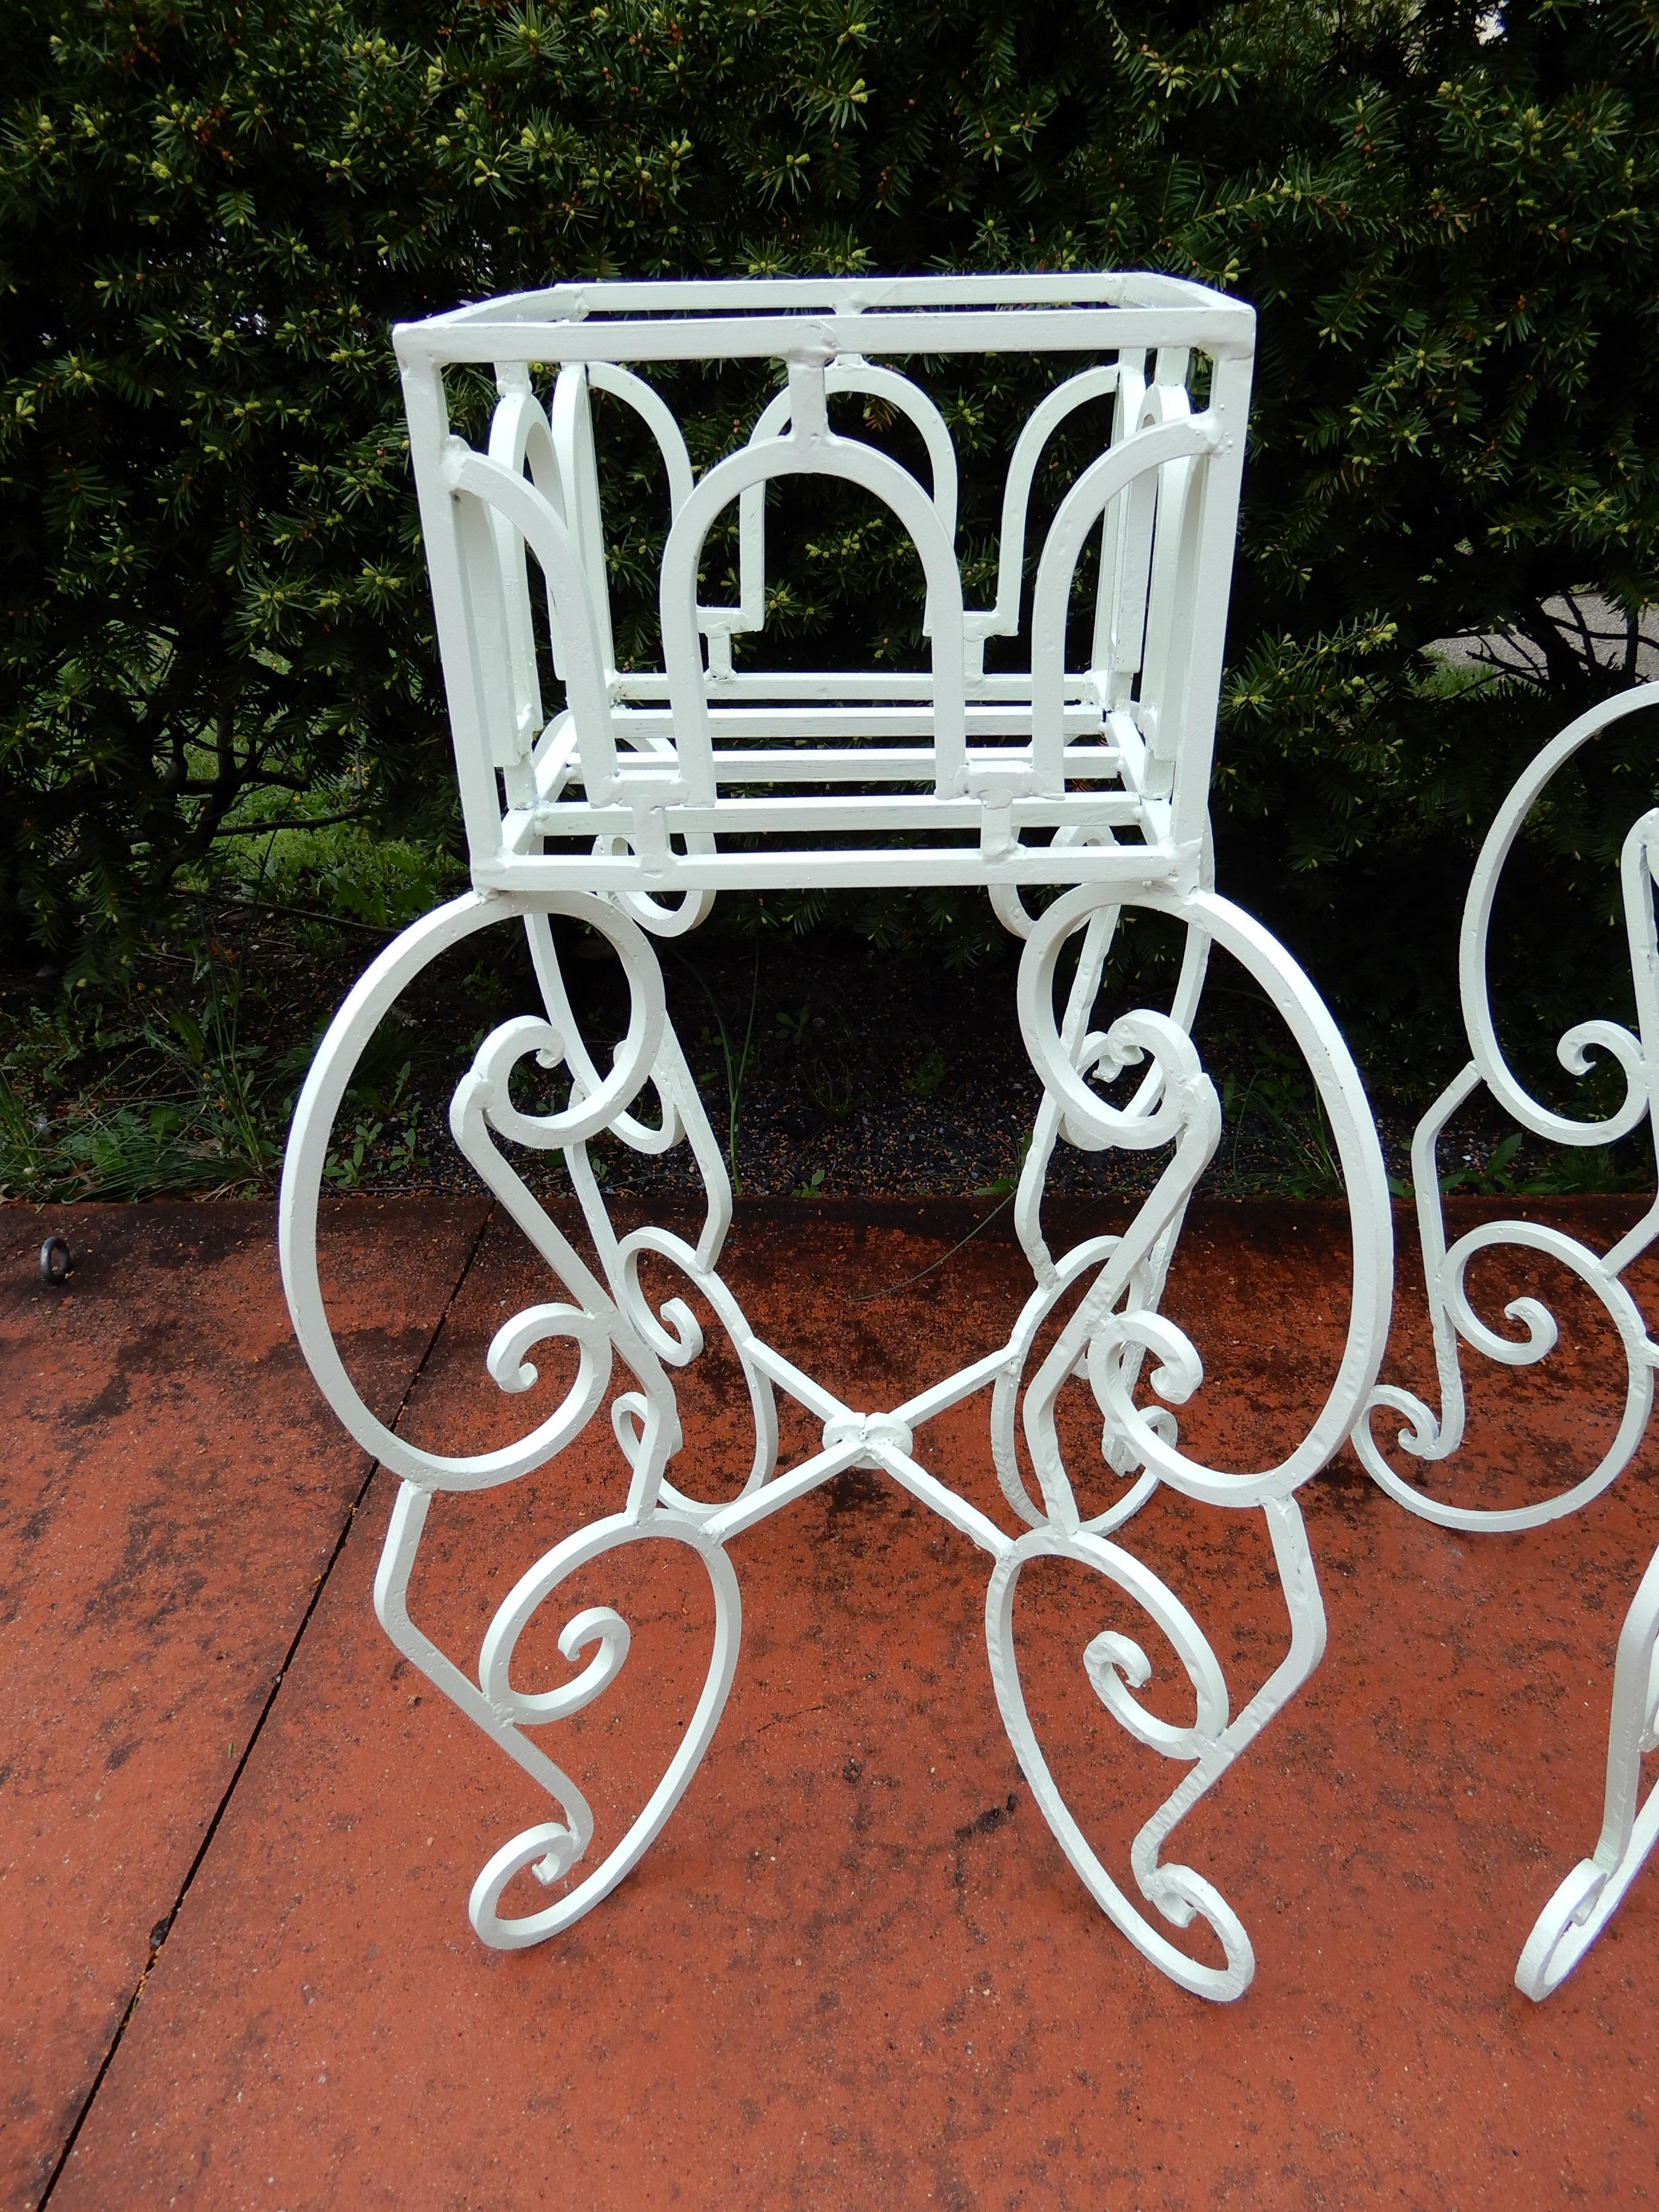 A pair of ornate wrought iron planters, unique design and possibly one of a kind, ready to show your favorite plants in, Just sandblasted and repainted, with no breaks or repairs. These are priced and sold as a pair